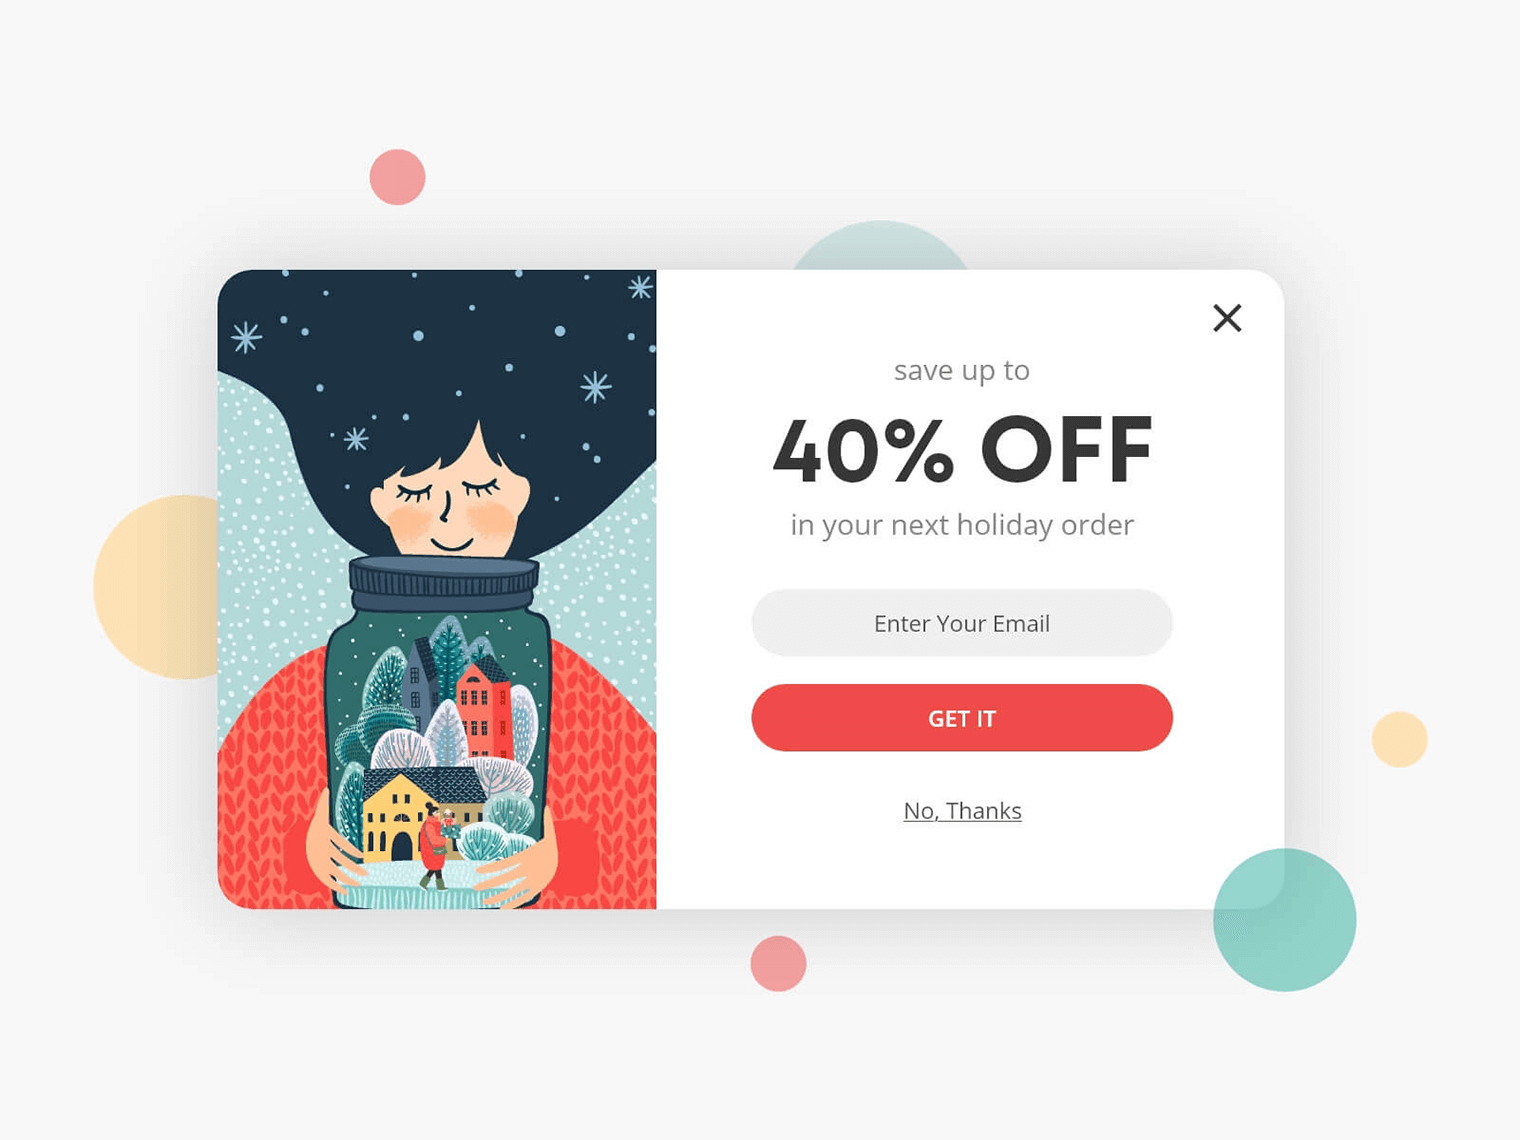 Show slipping customers an exit popup with a coupon to reactivate them